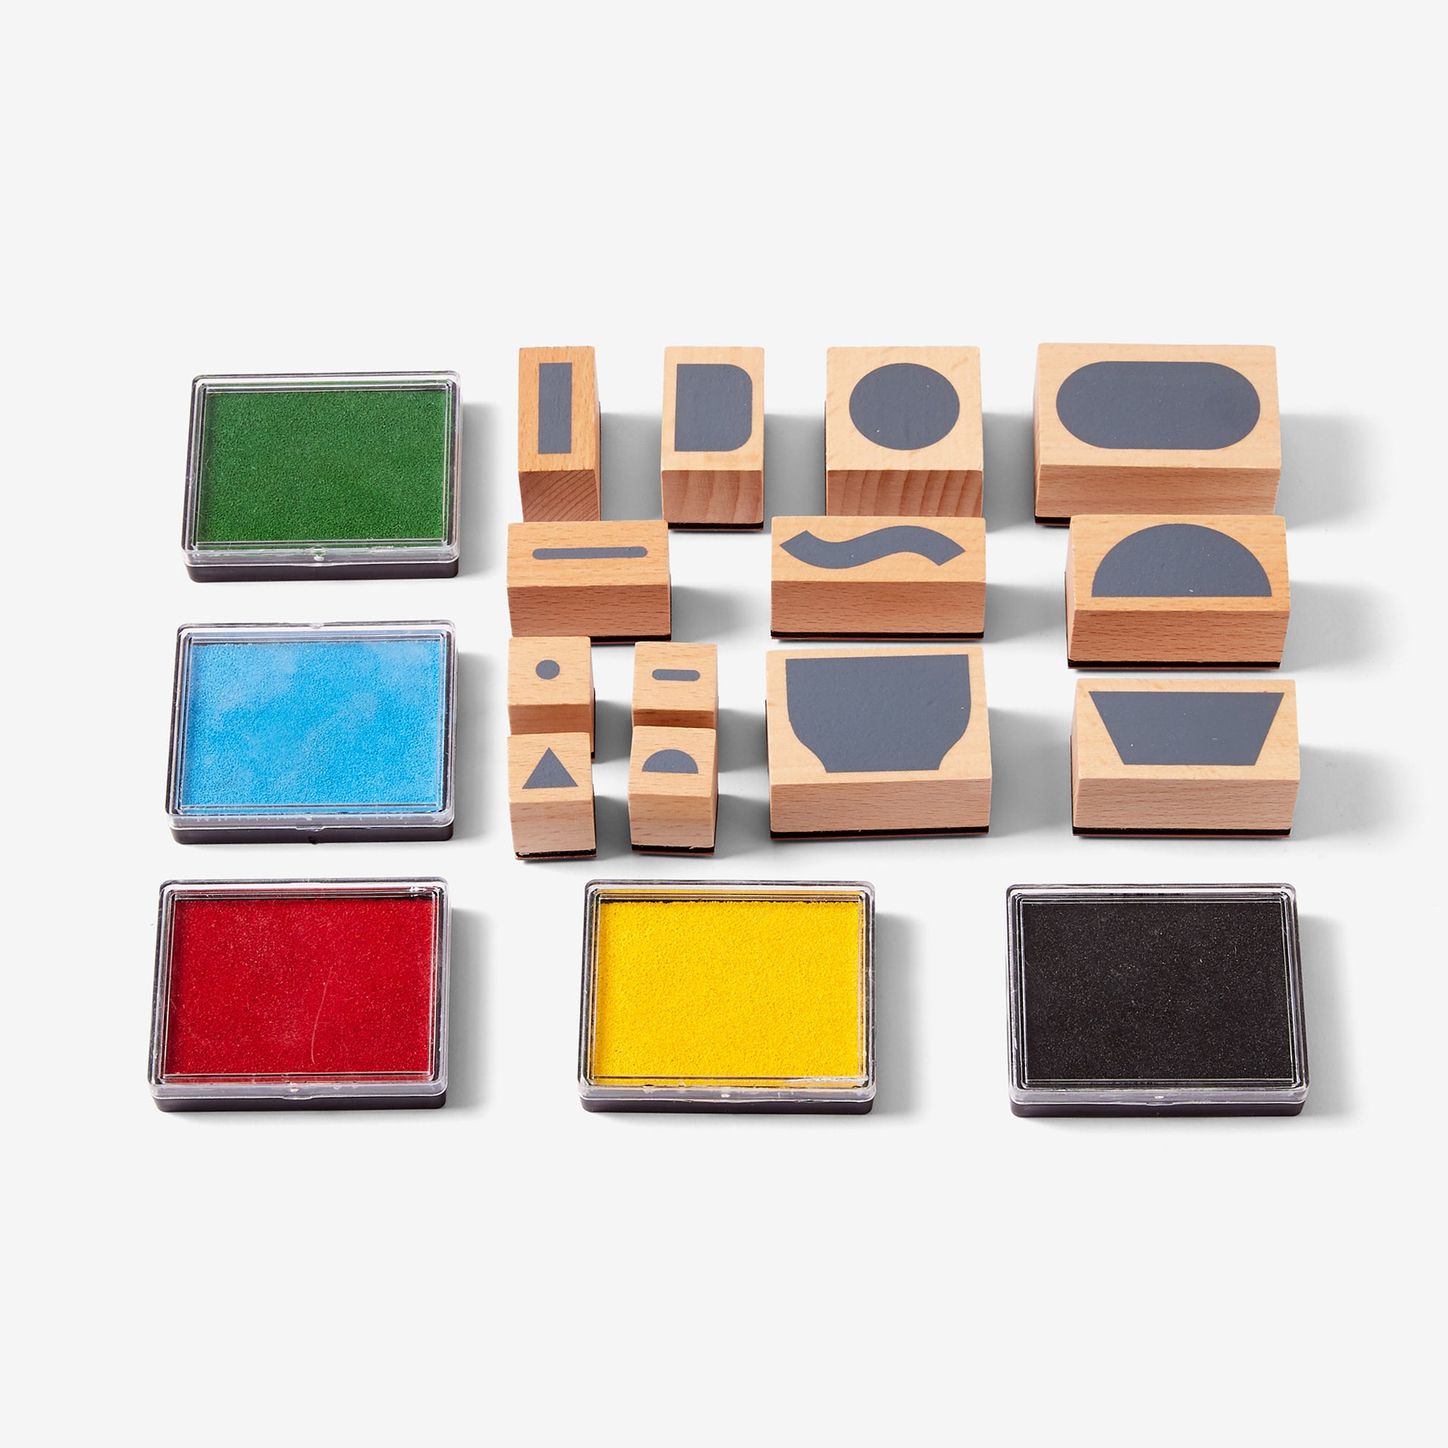 40 Best Gifts for Artists, According to Real Artists & Designers